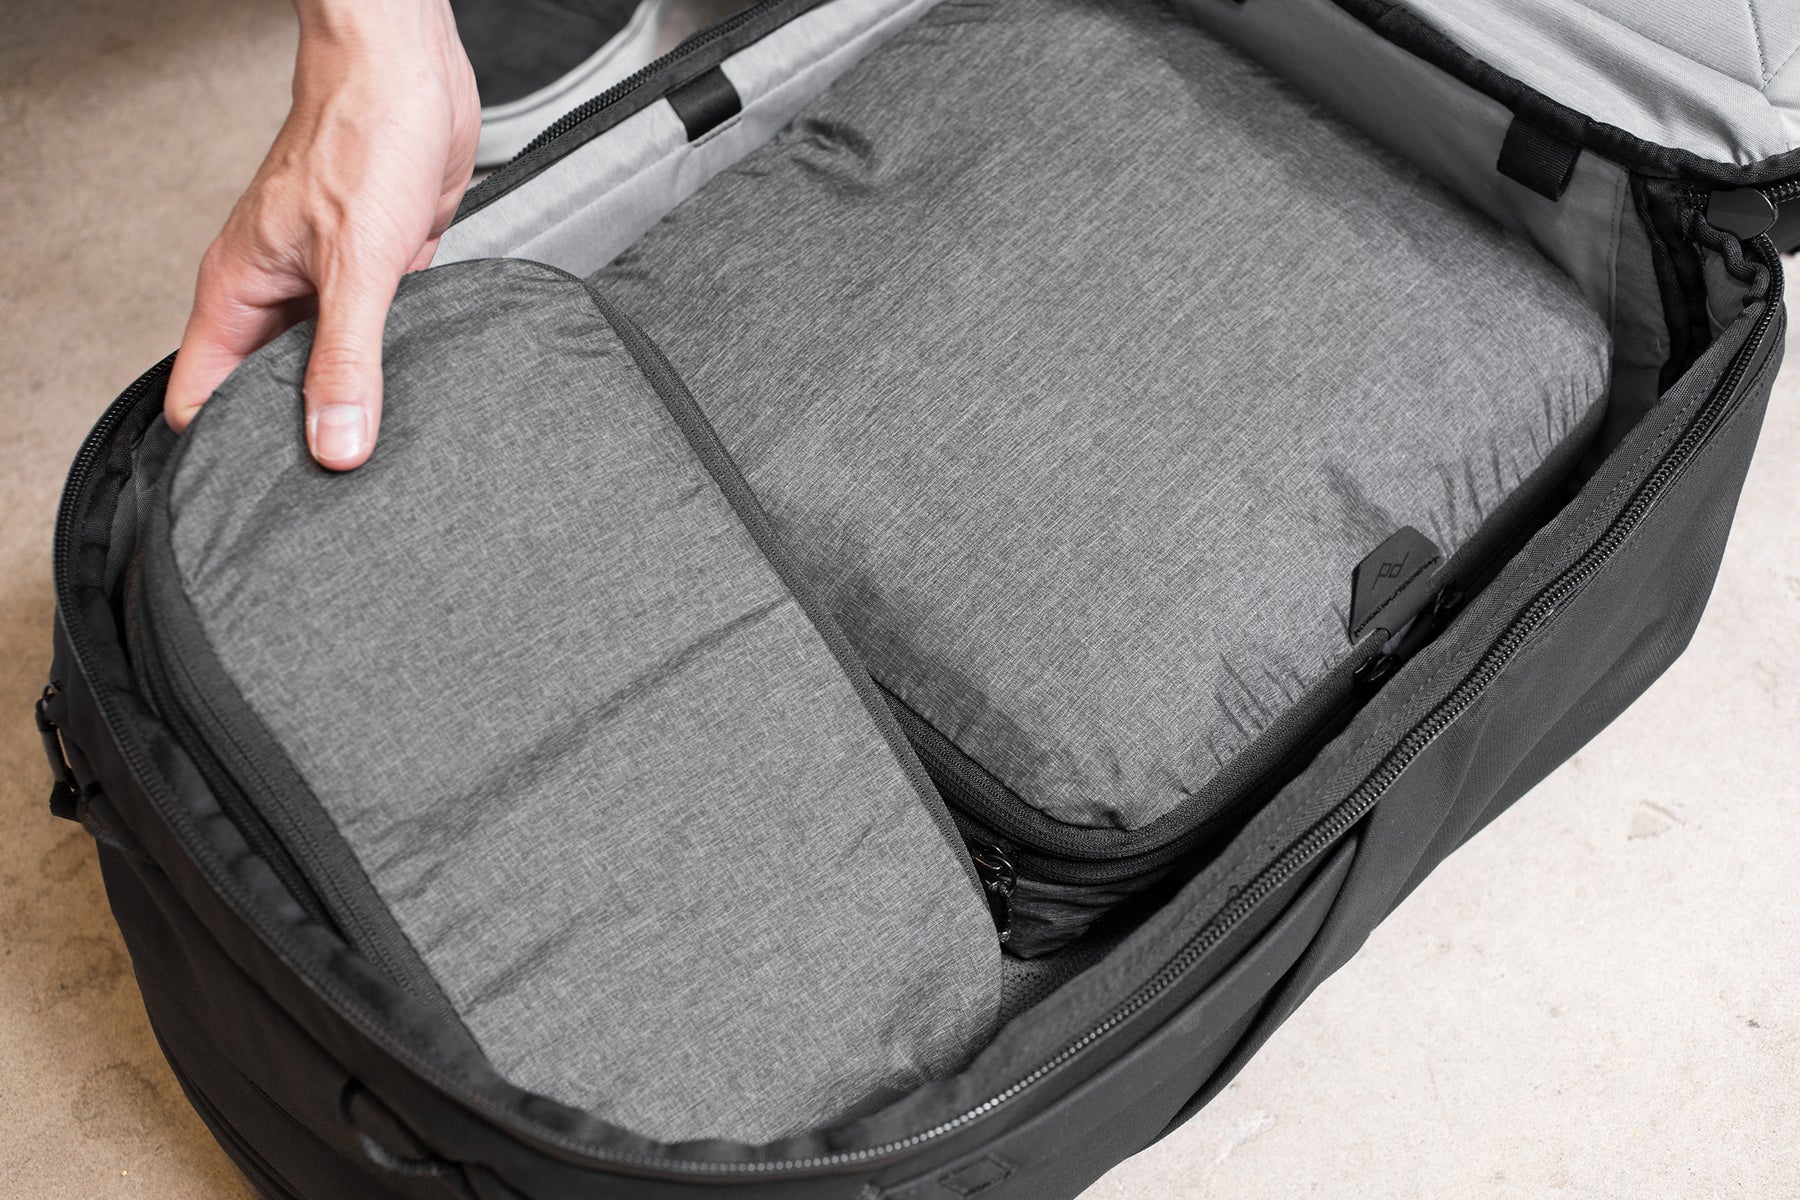 Peak Design Packing Cubes, Some Of The Best Packing Cubes In The World